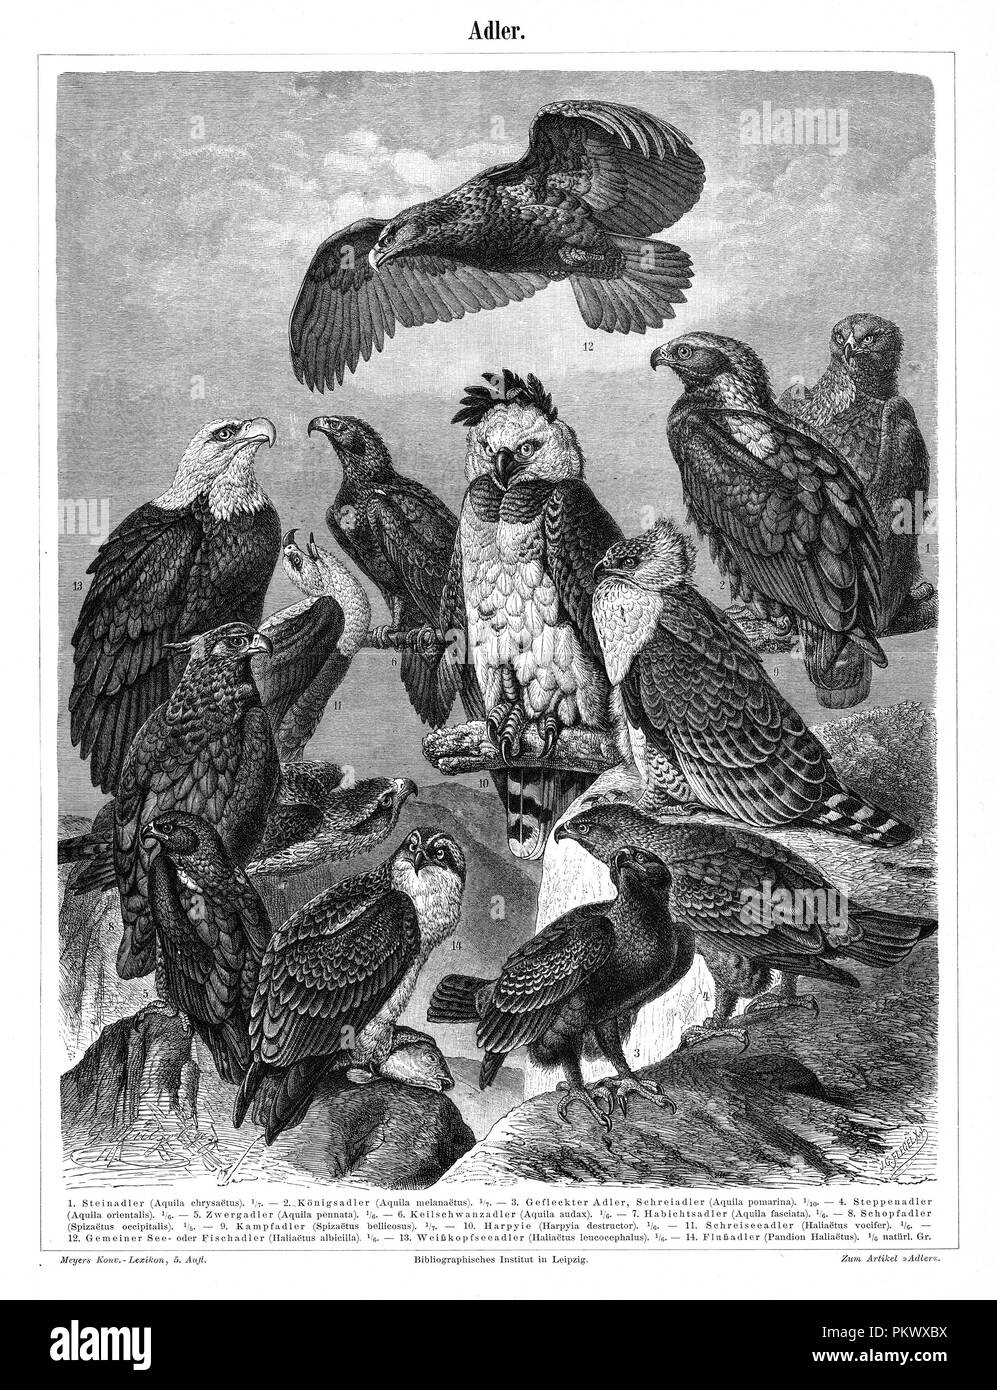 Birds of Prey, Antique book illustrations, scanned. Images contain a set of birds, originally illustrated for encyclopedias of the late 1800s. Stock Photo